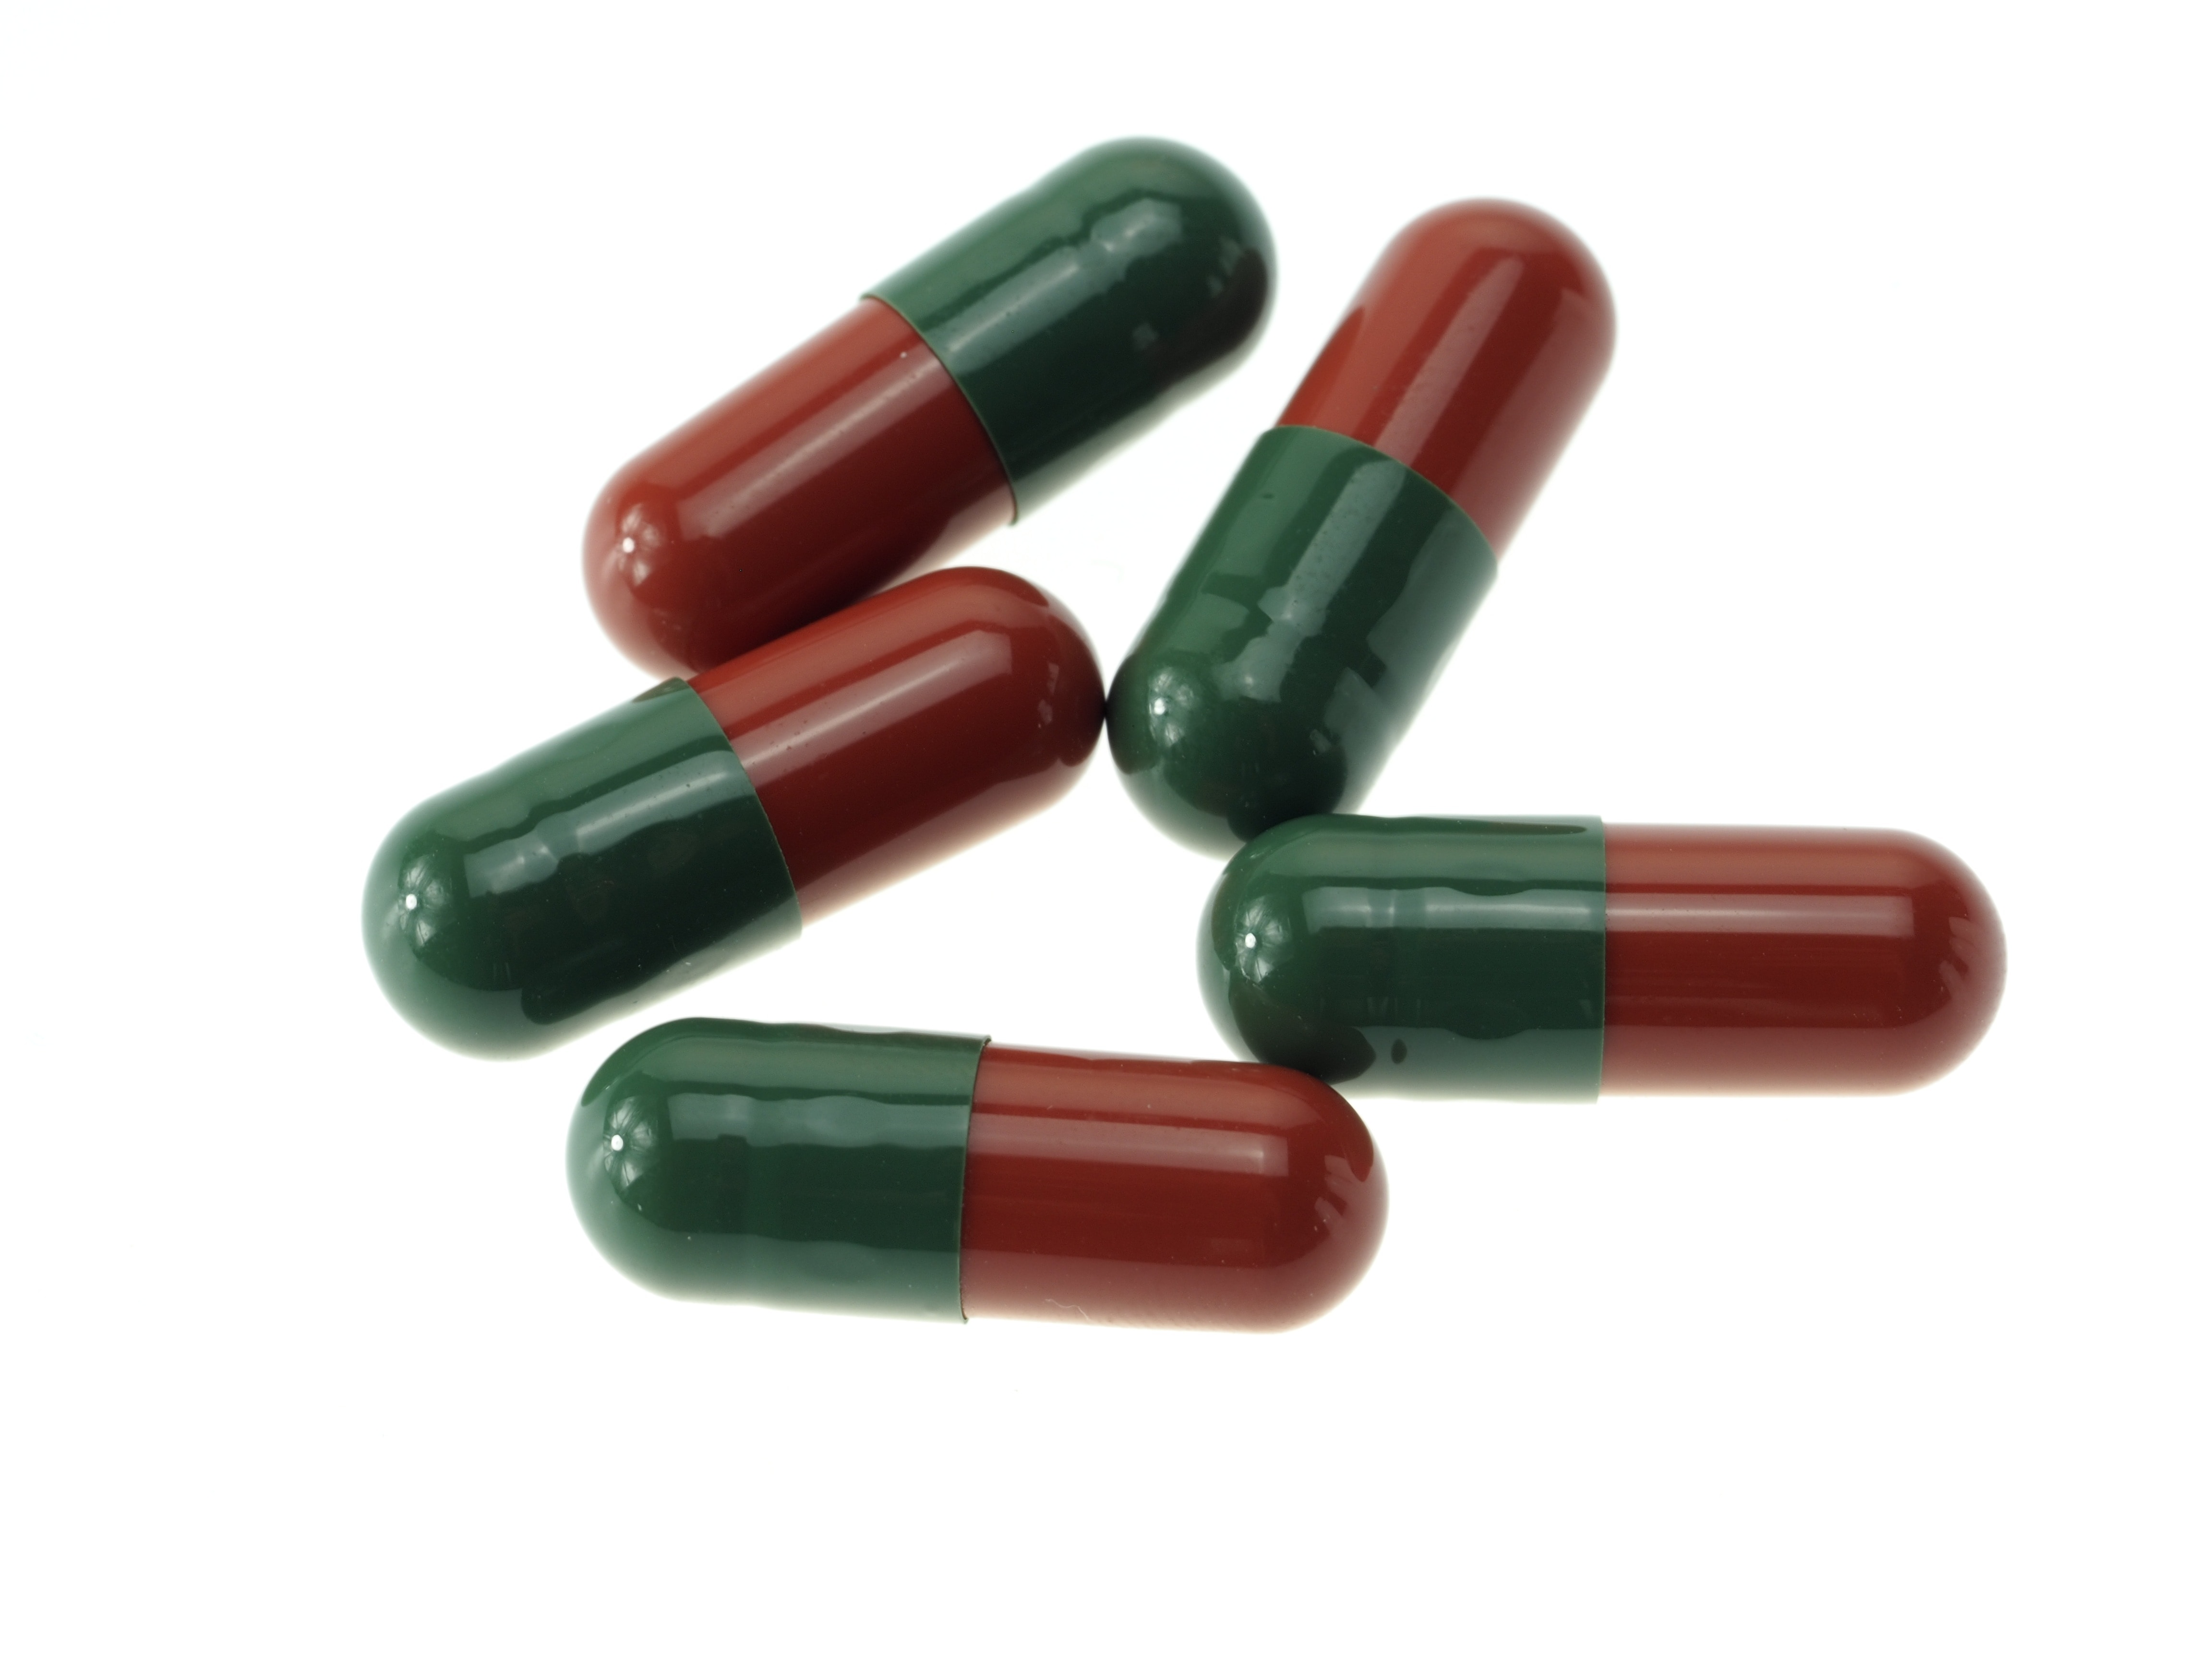 5 red and green medicine pills